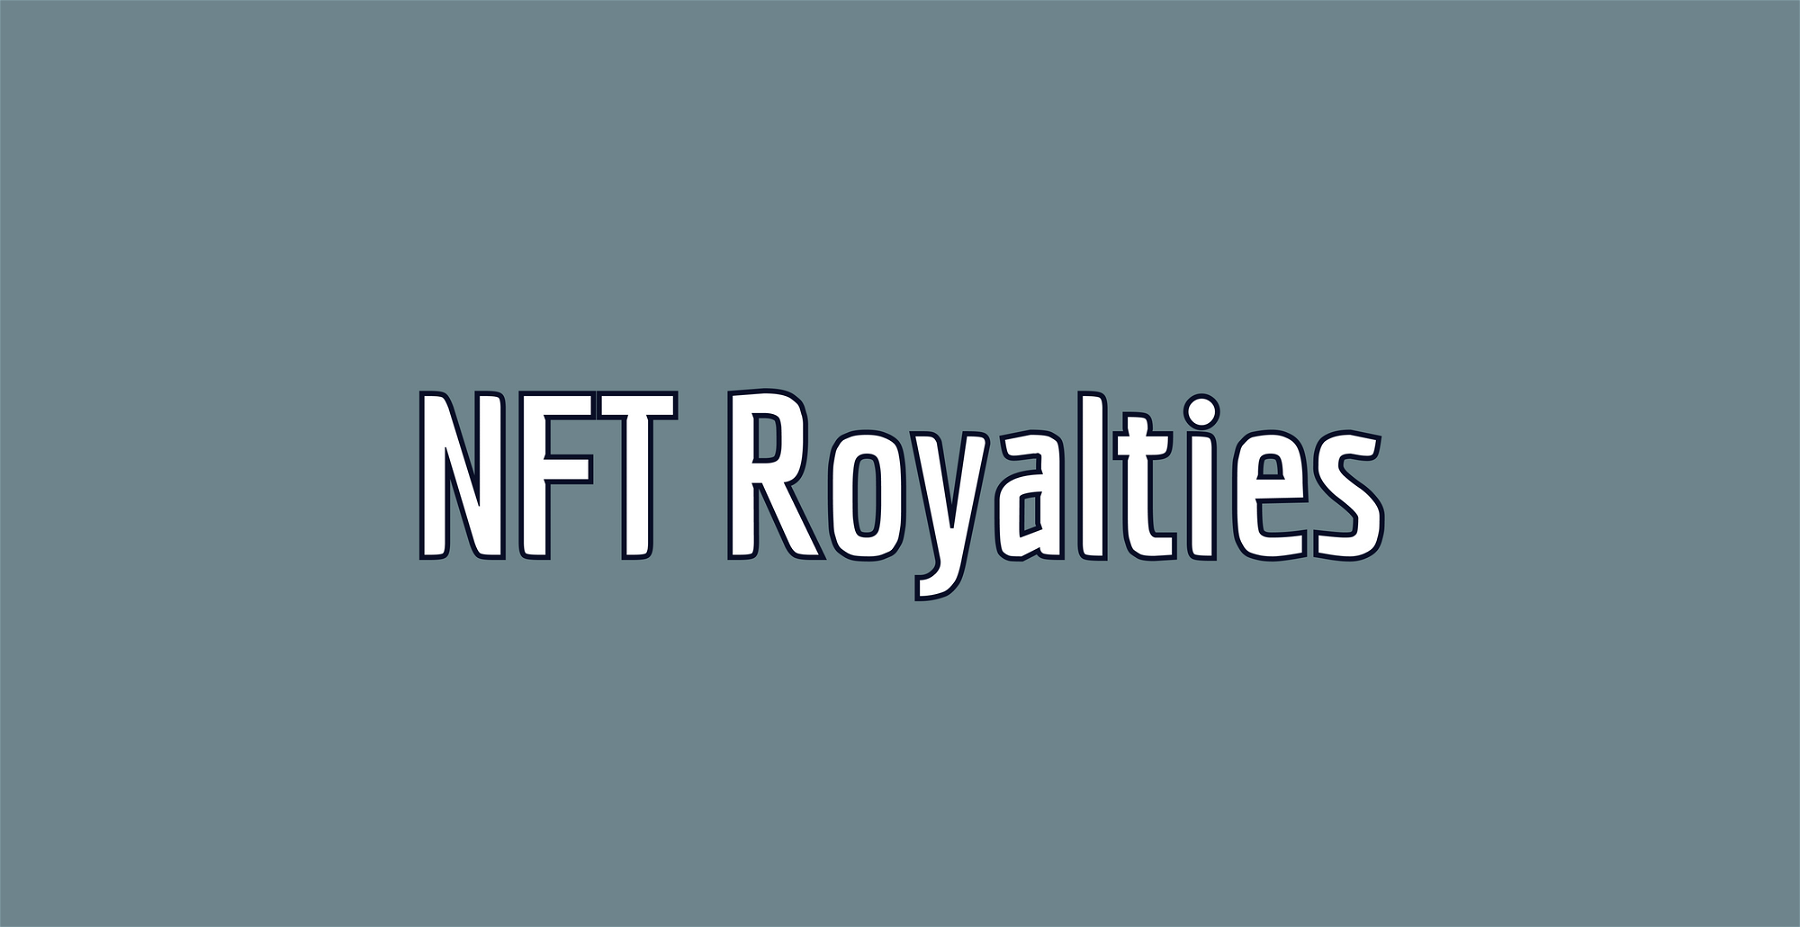 NFT Royalties: The $1.8bn Question